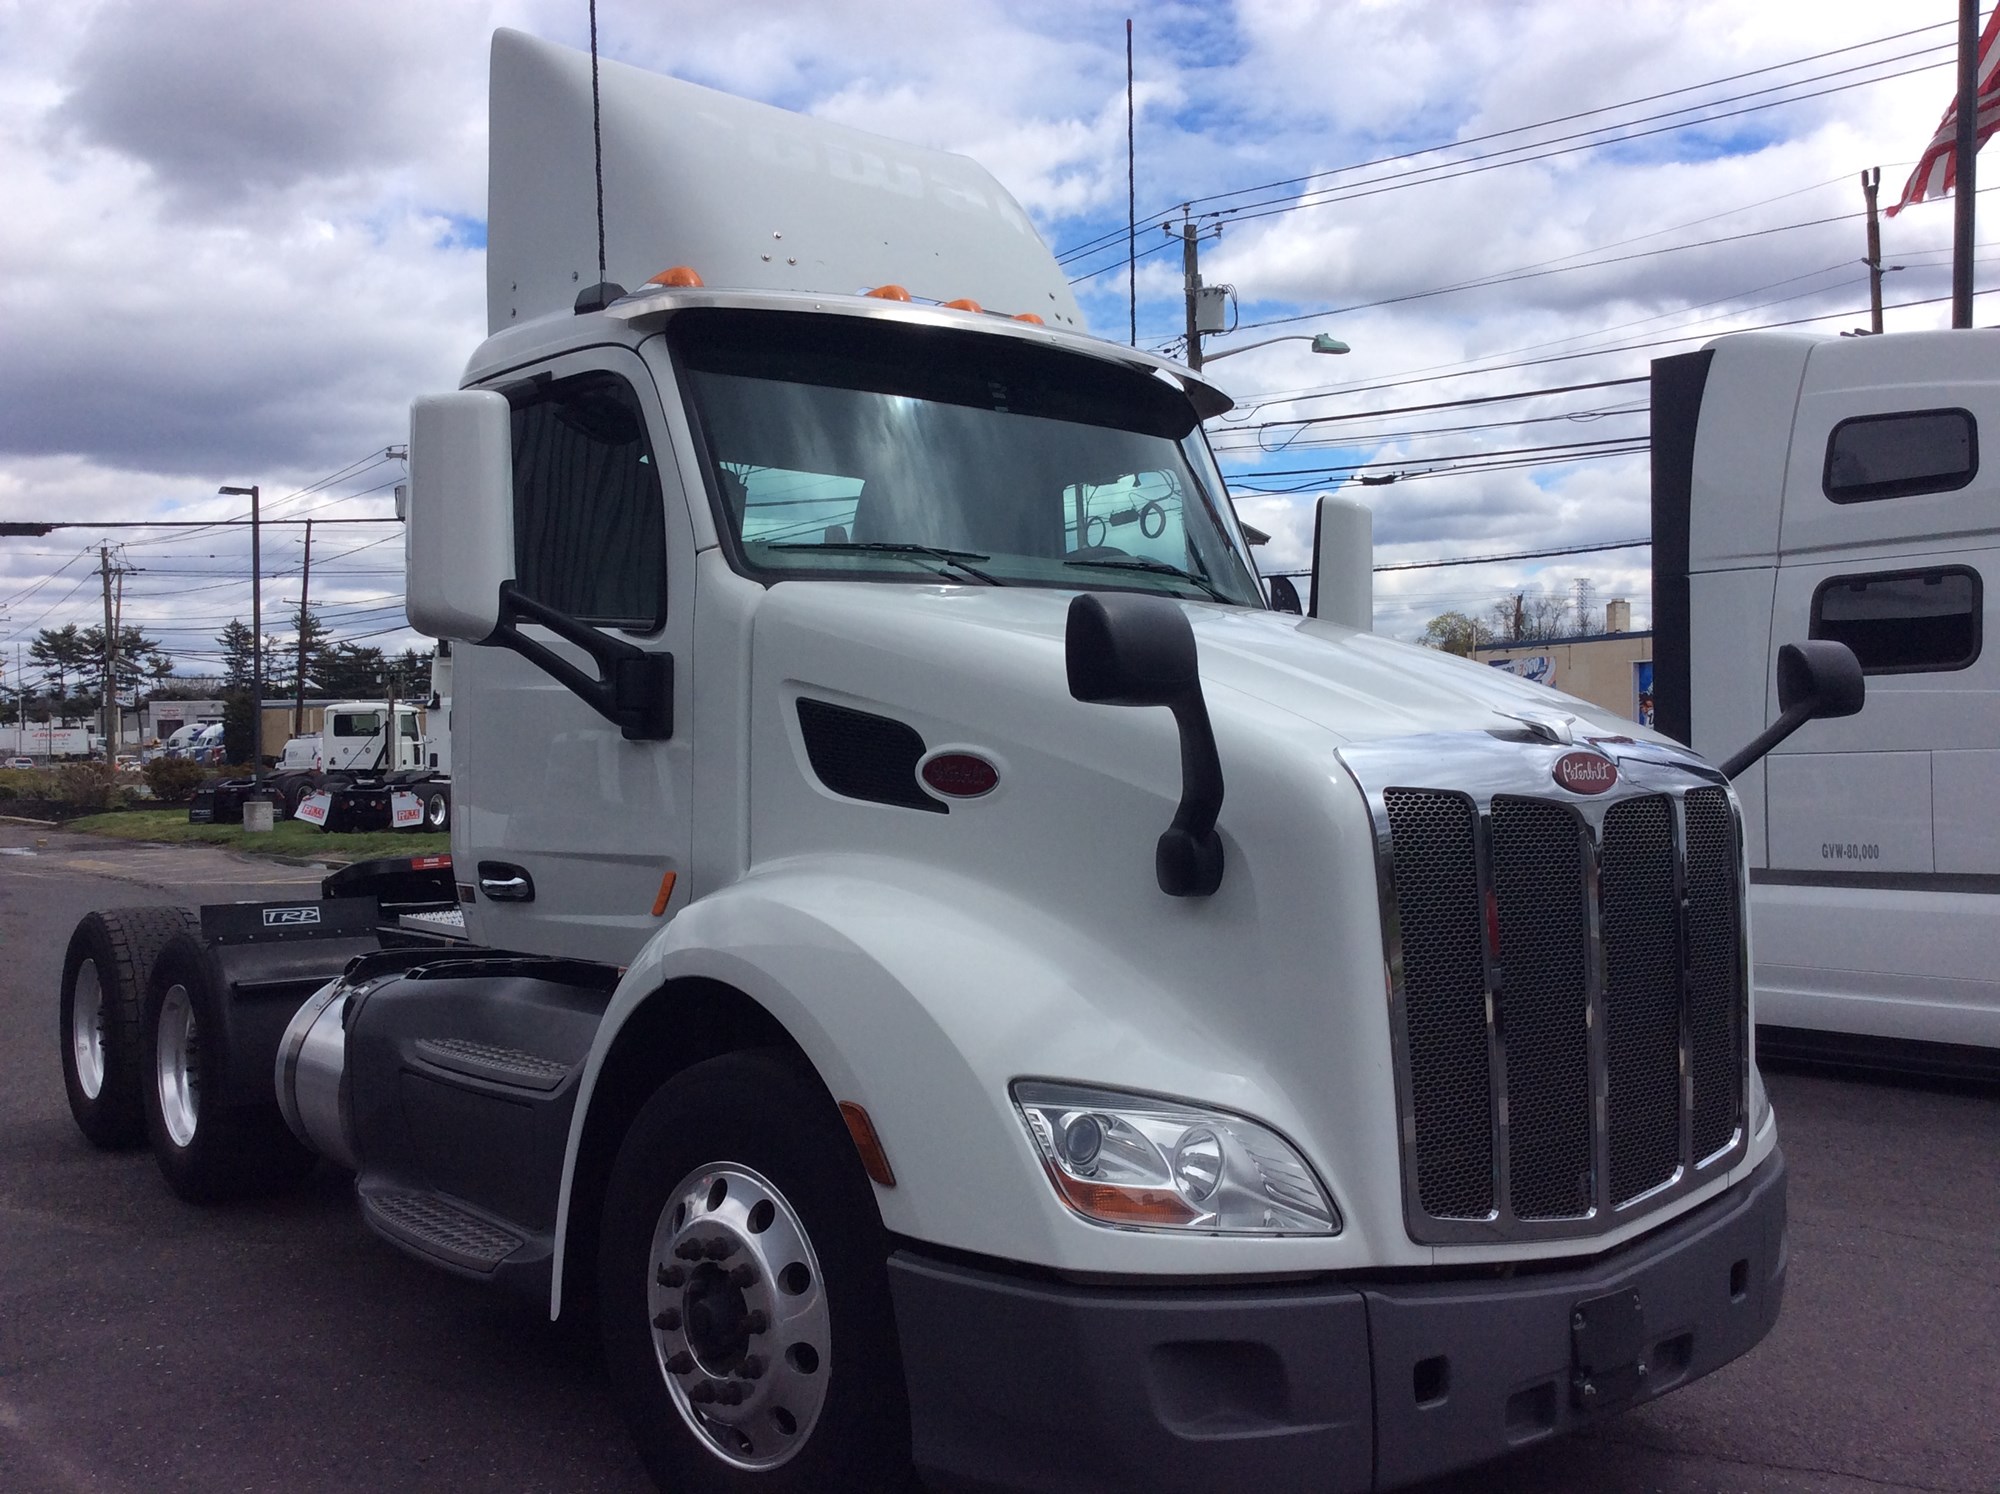 Used Truck Inventory - 1000350 02 - 93